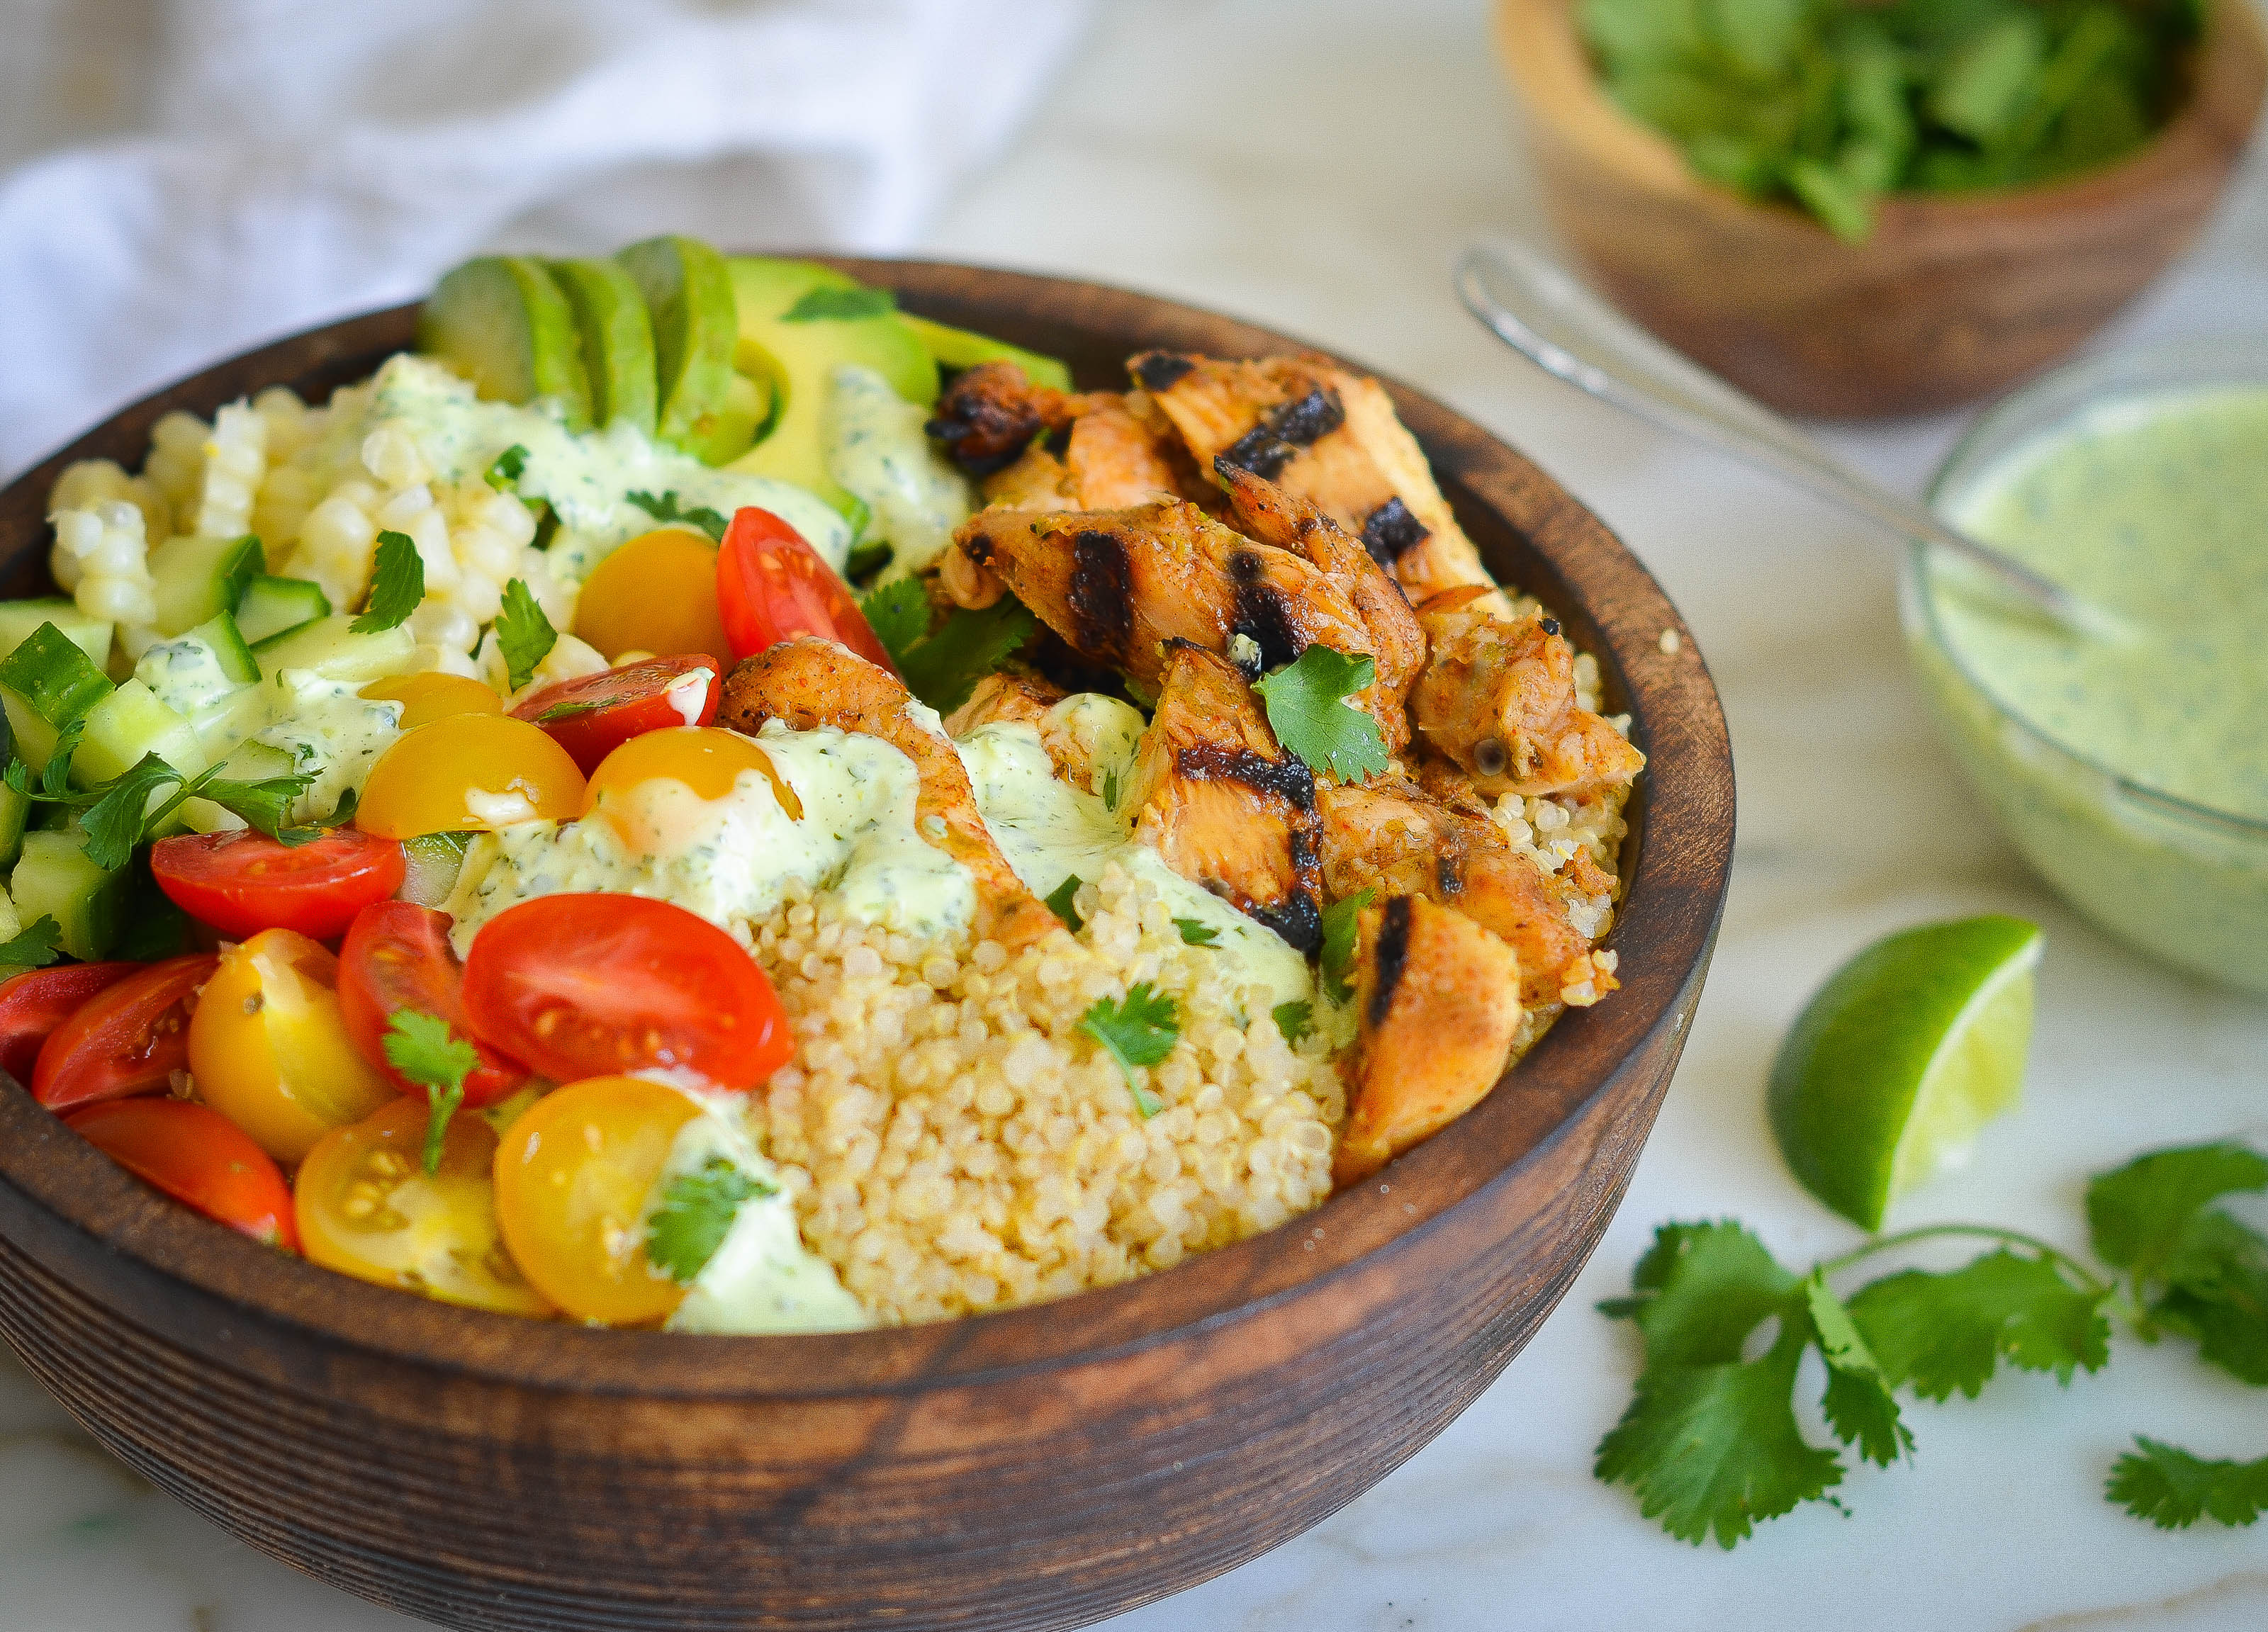 Chicken & Quinoa Burrito Bowls with Spicy Green Sauce - Once Upon a Chef